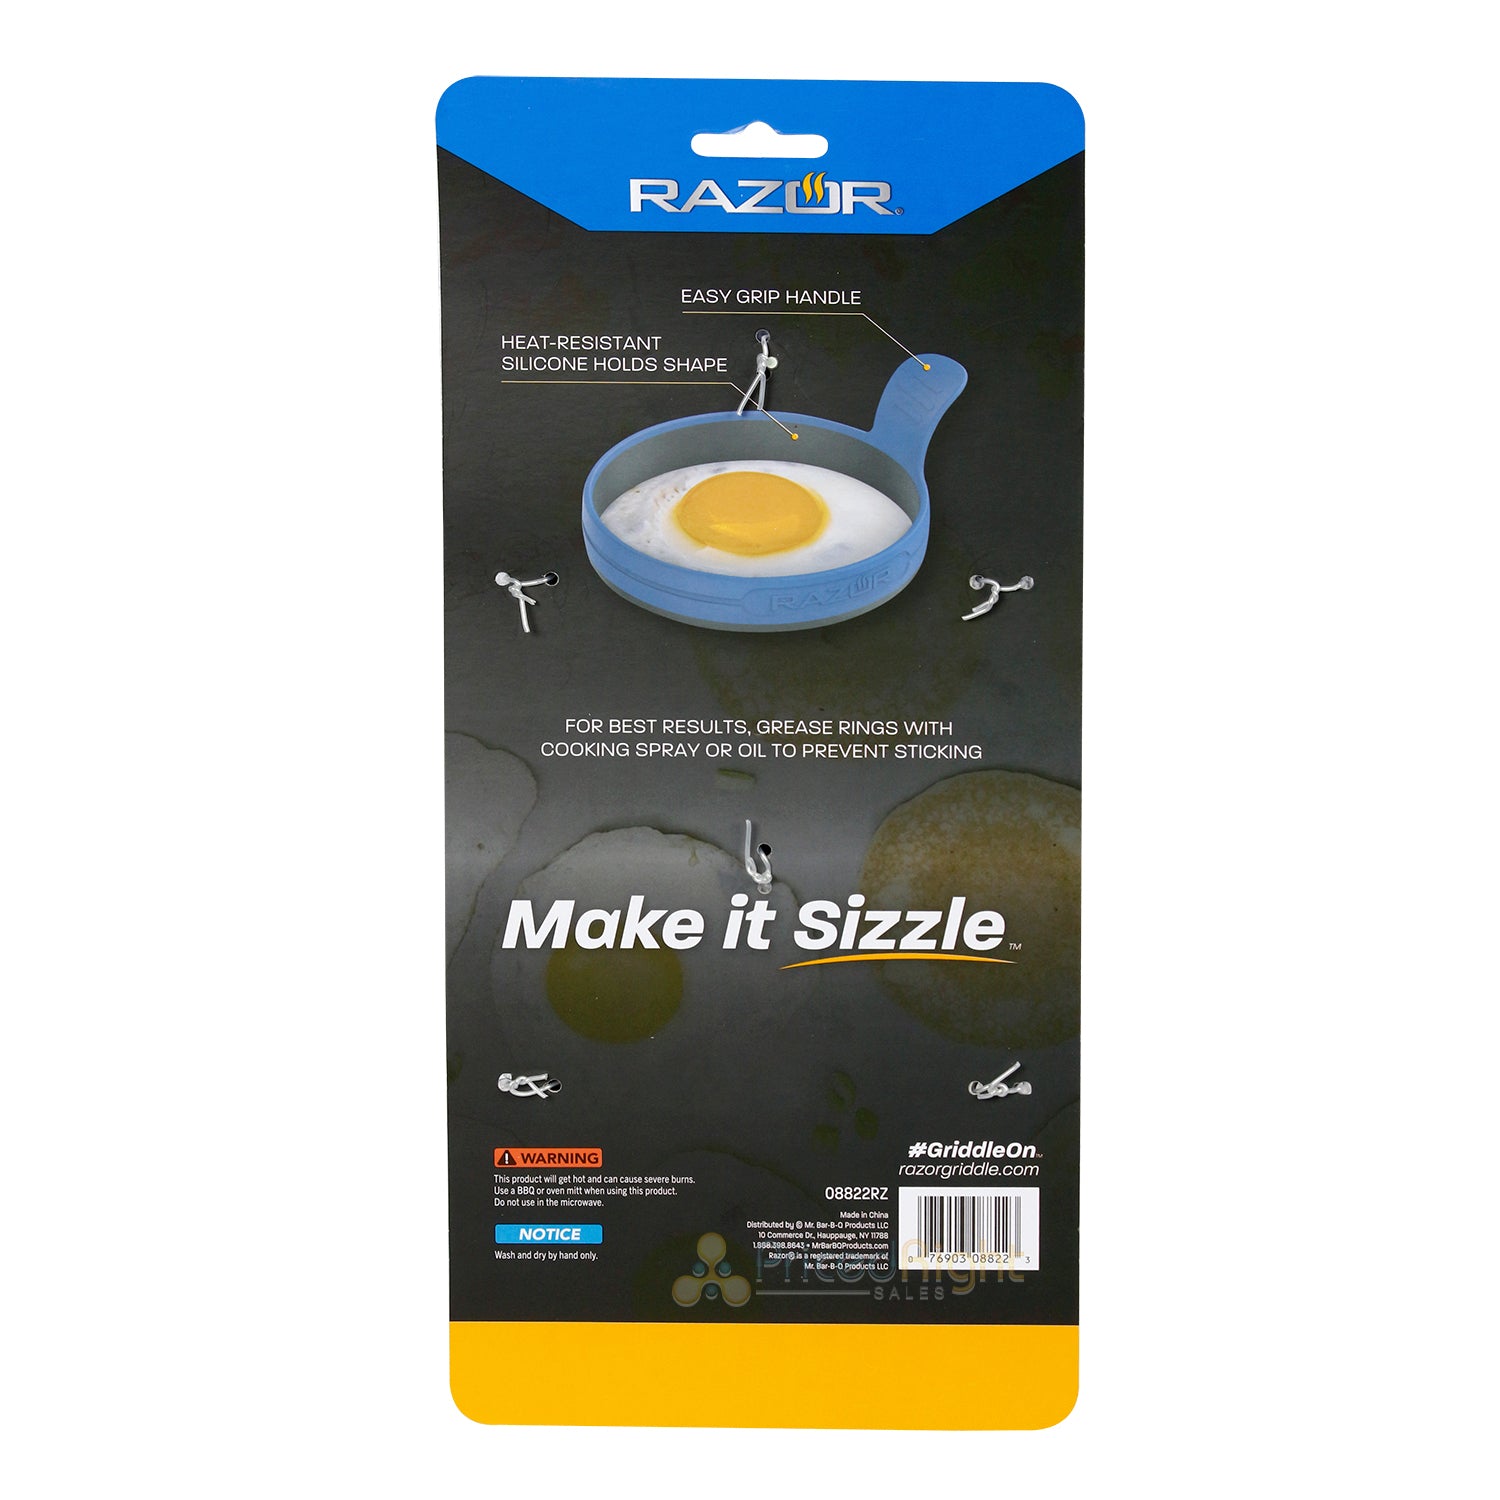 Razor Griddle Egg Rings 4 Pack Heat-Resistant Silicone With Easy-Grip Handles